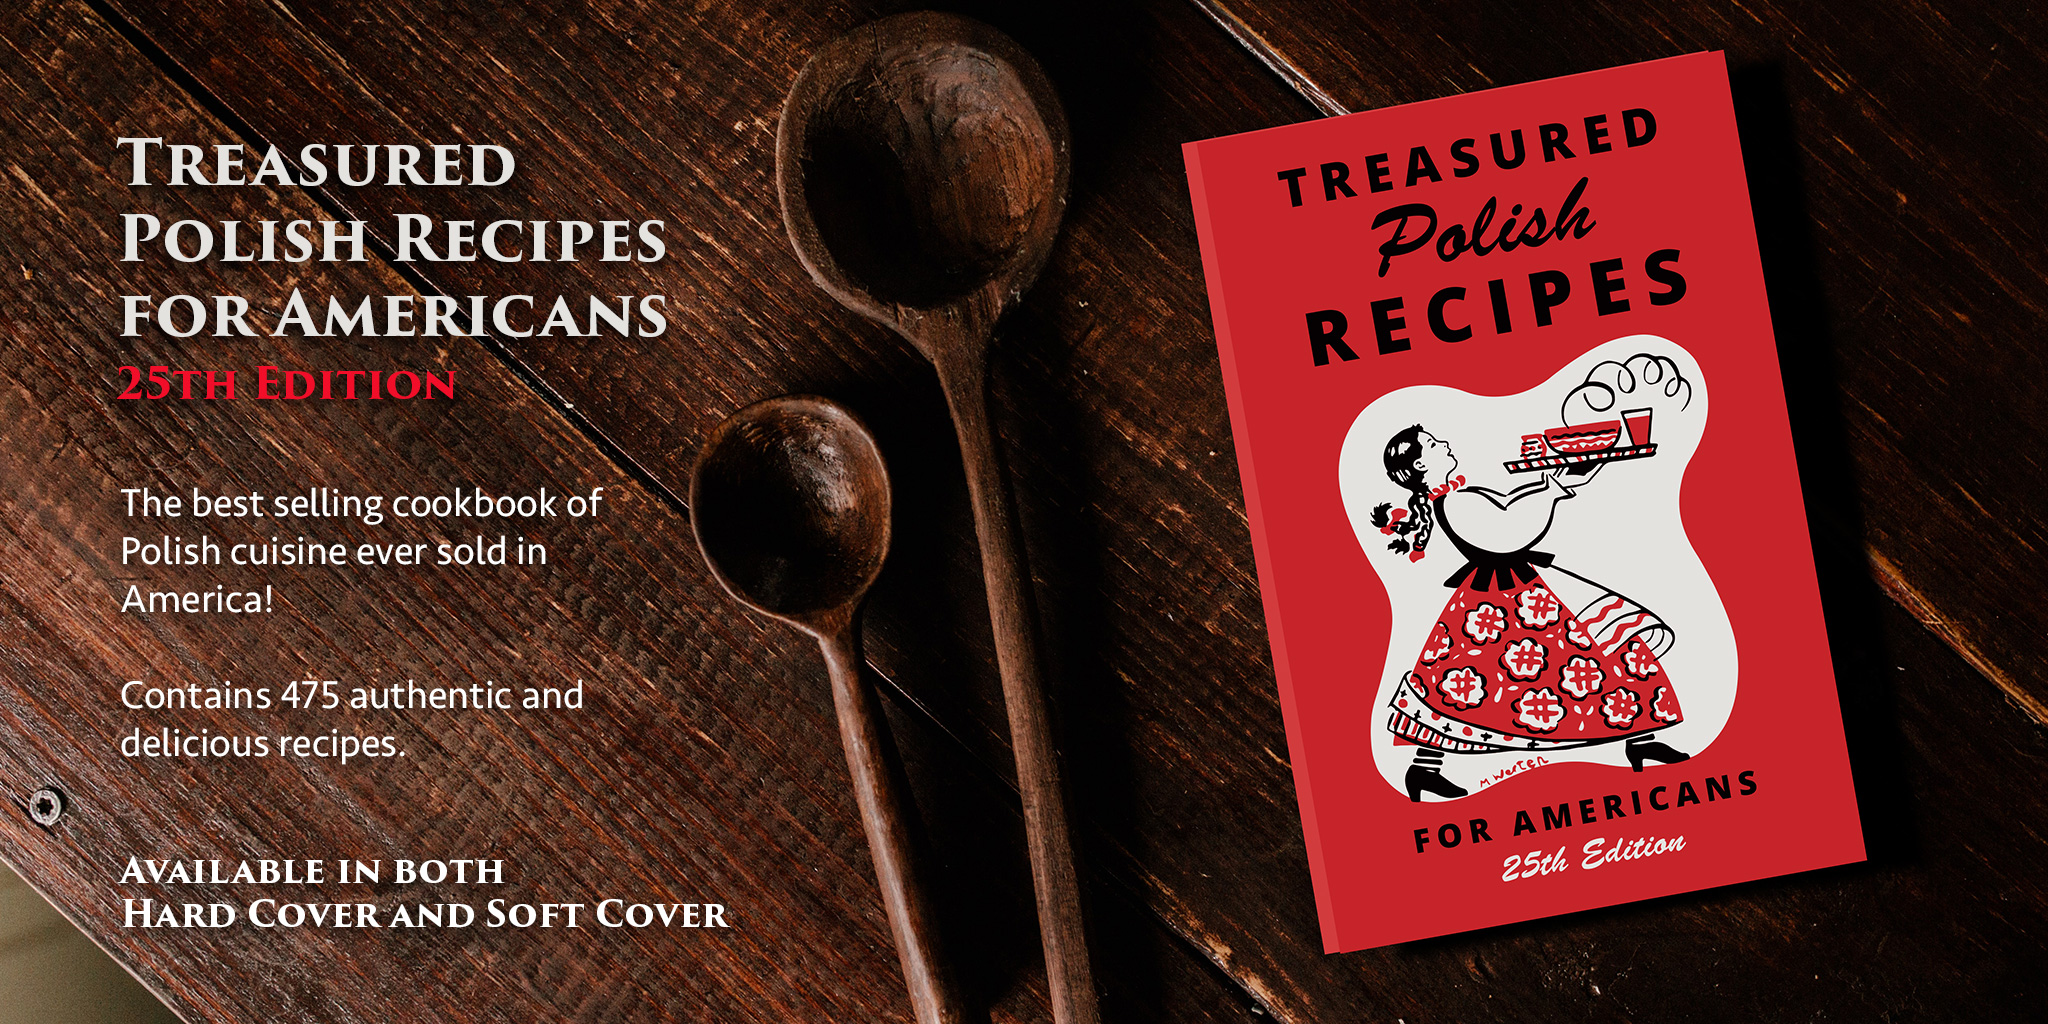 Treasured Polish Recipes for Americans, 25th Edition. Best Selling Cookbook